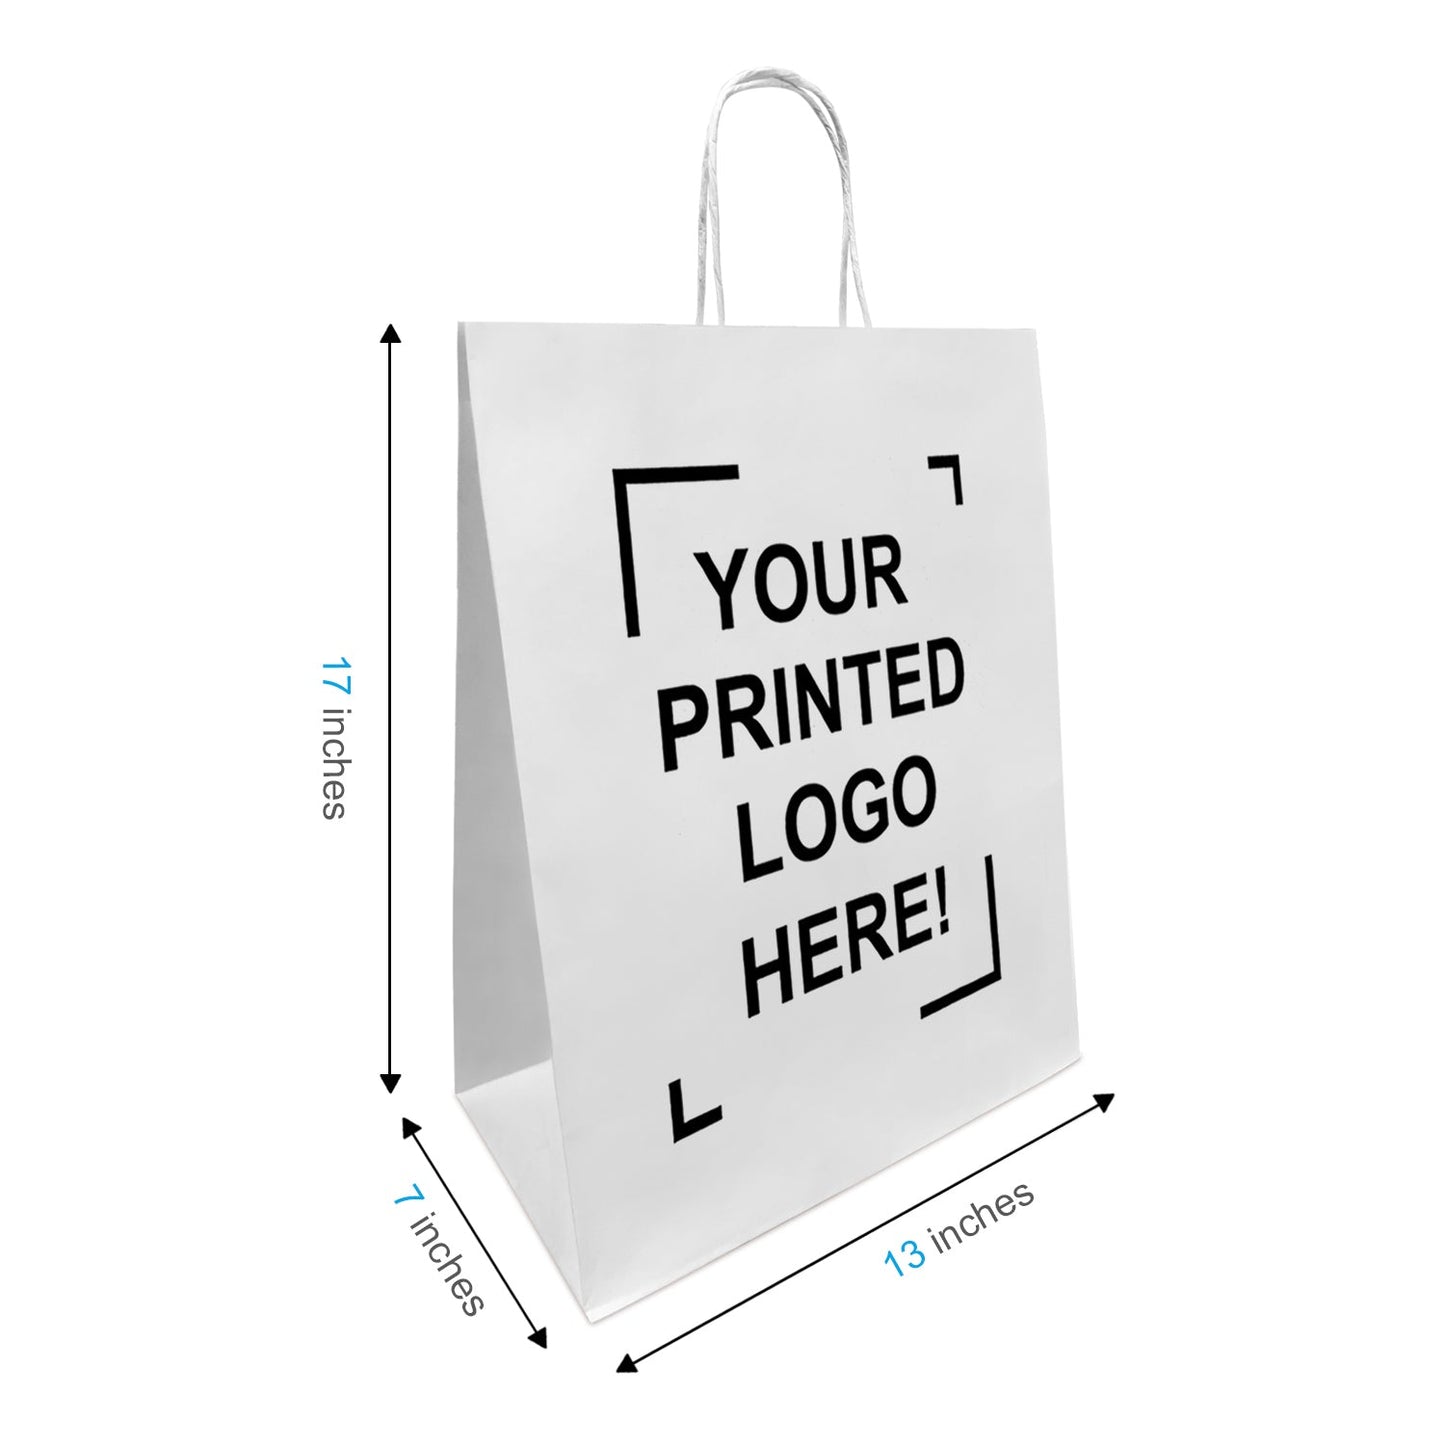 250 Pcs, Mart, 13x7x17 inches, White Paper Bags, with Twisted Handle, Full Color Custom Print